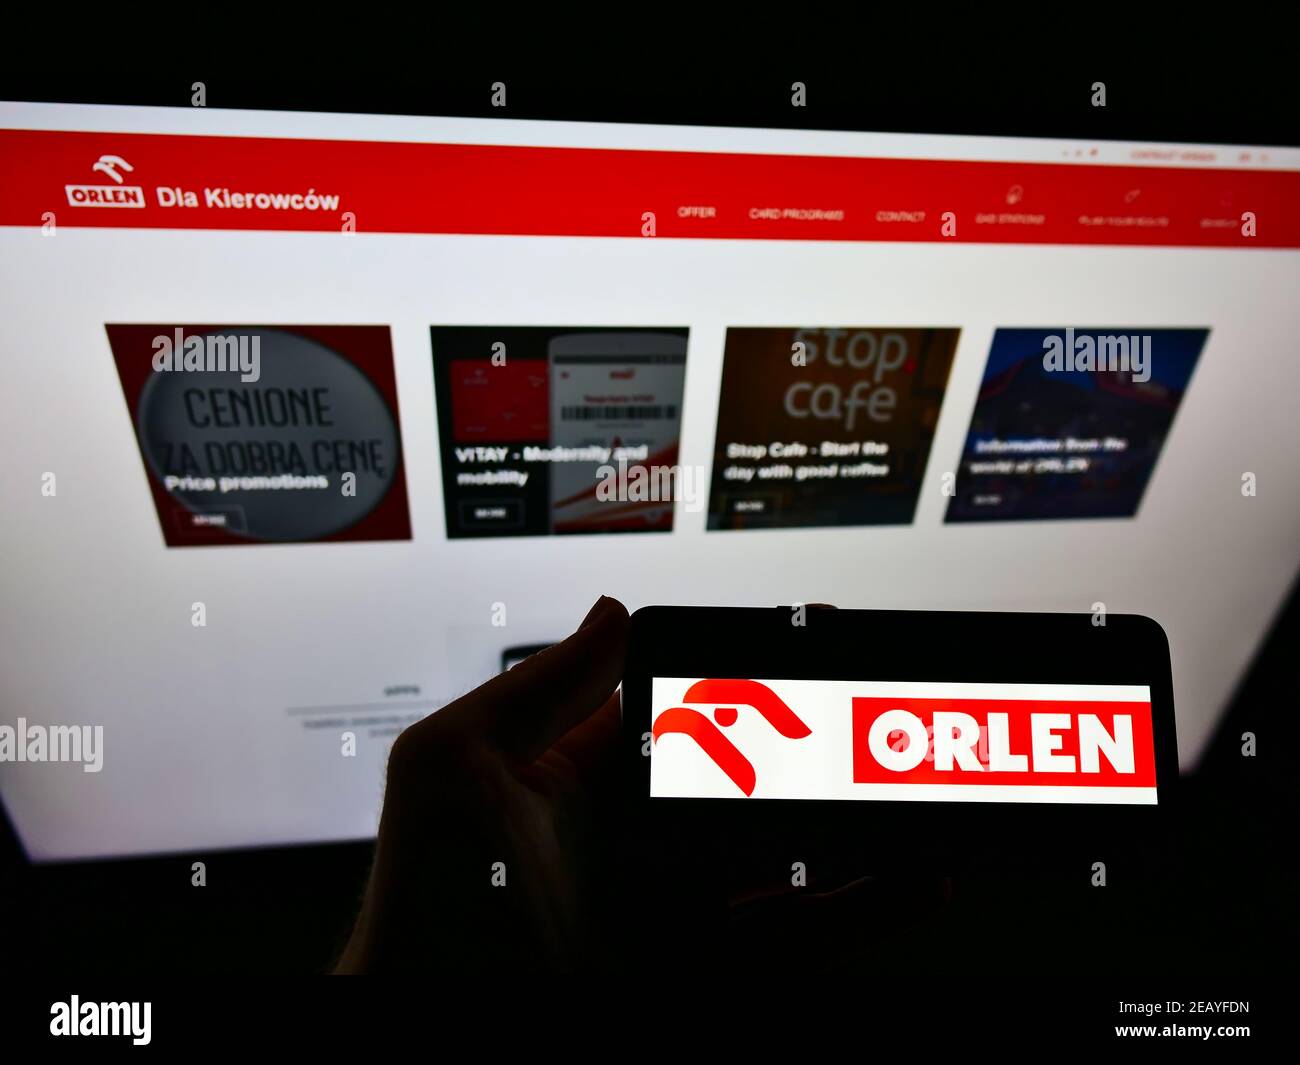 Person holding mobile phone with logo of Polish oil and gas company PKN Orlen on screen in front of business website. Focus on cellphone display. Stock Photo